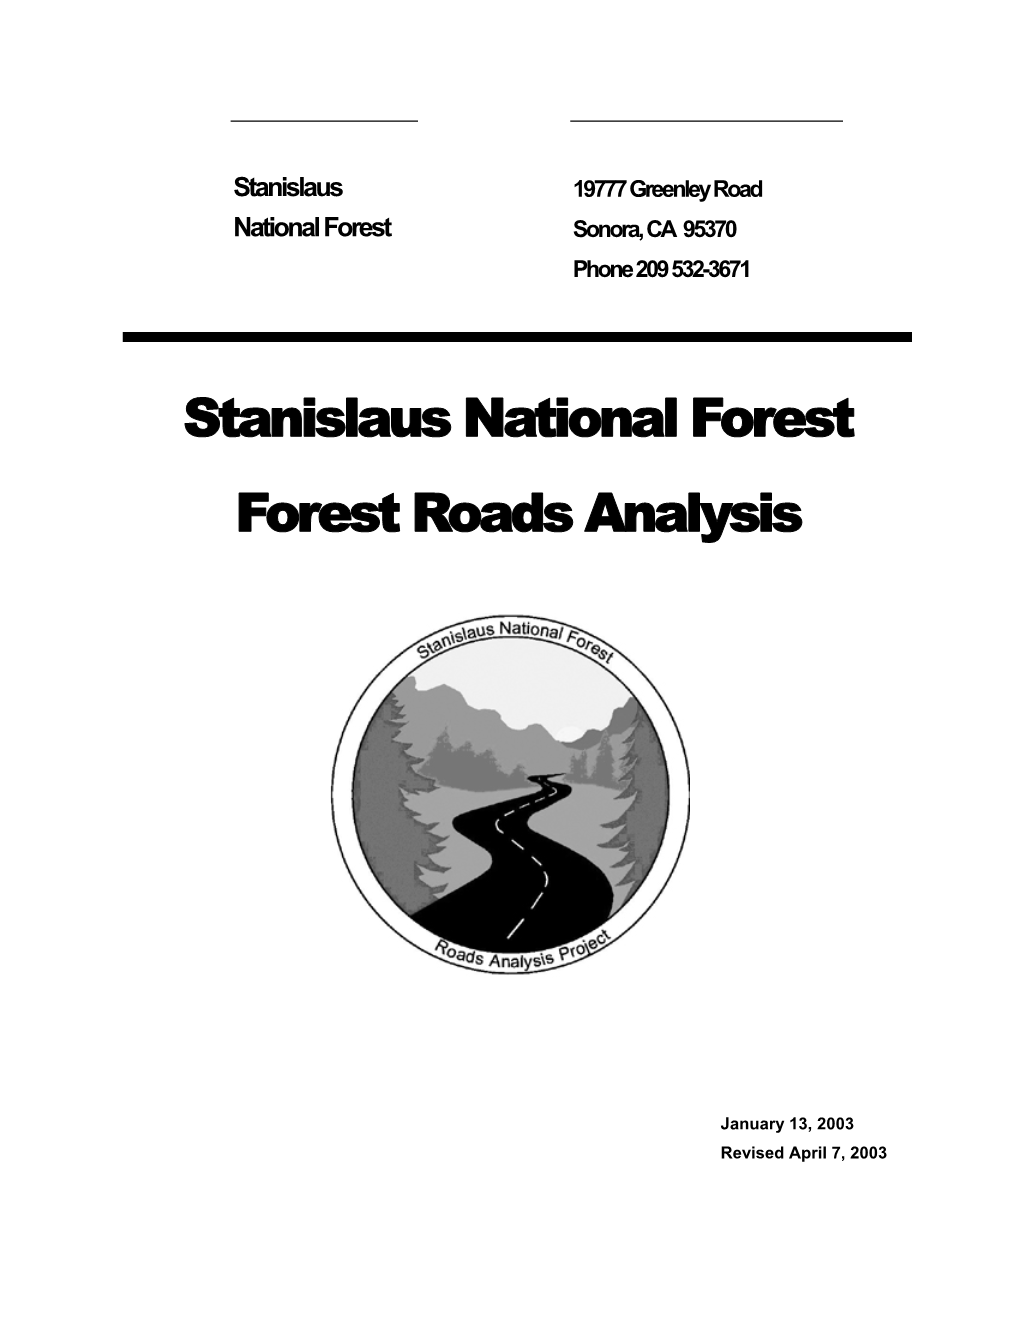 Stanislaus National Forest Forest Roads Analysis